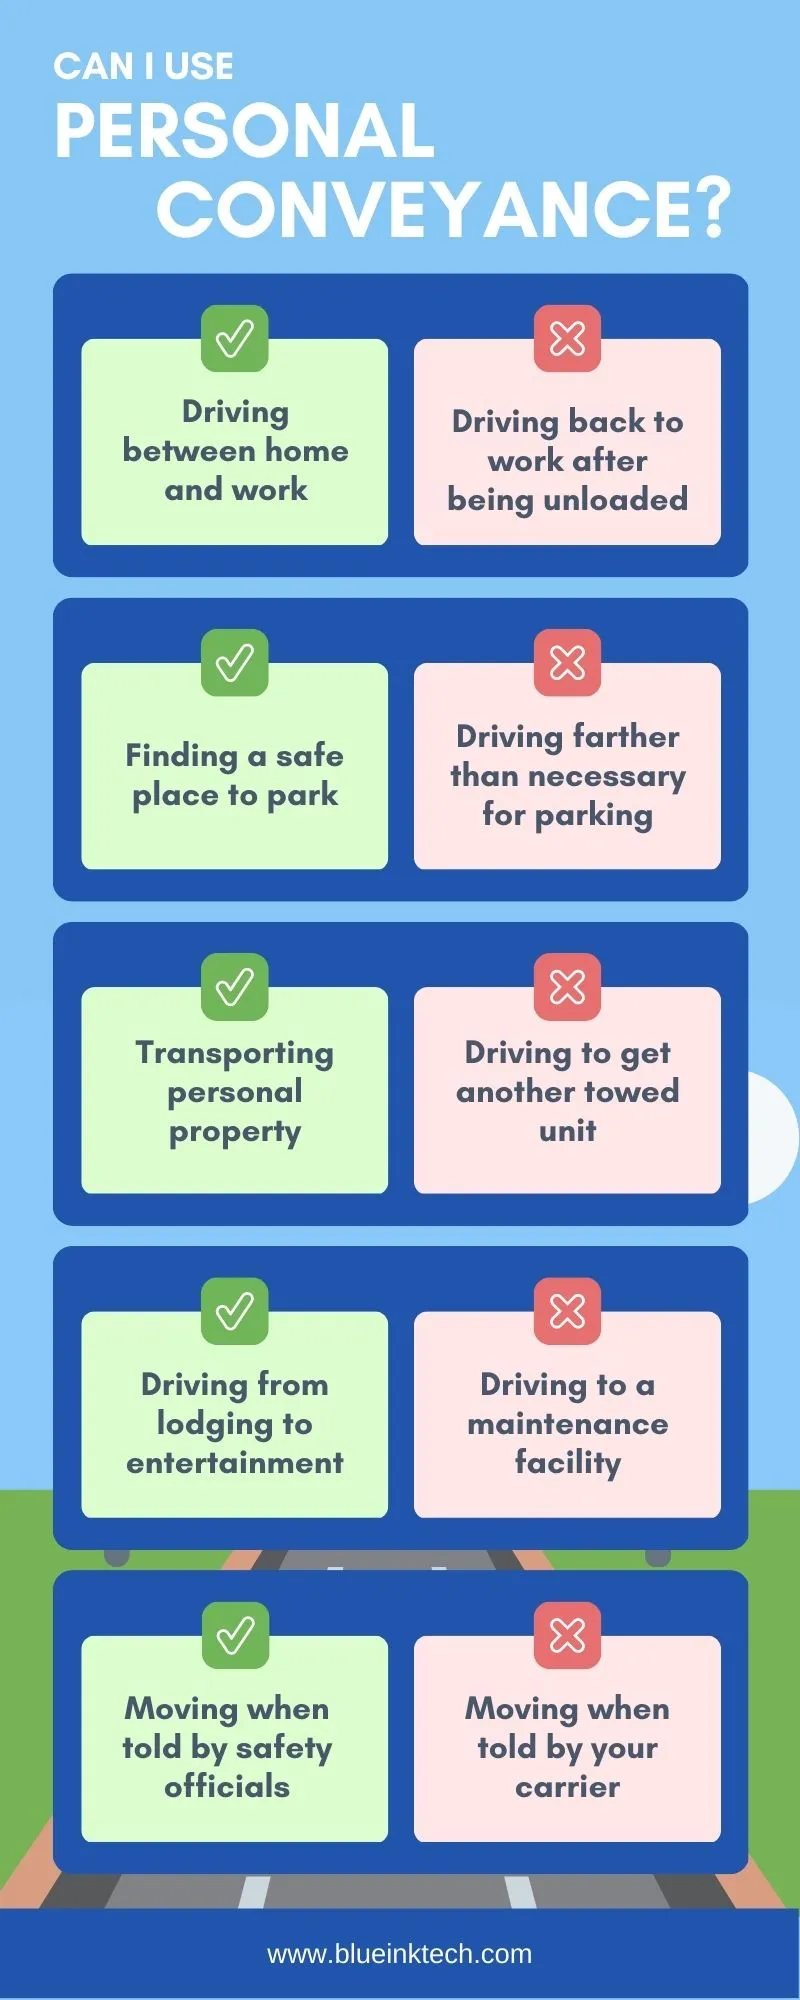 Can I Use Personal Conveyance infographic